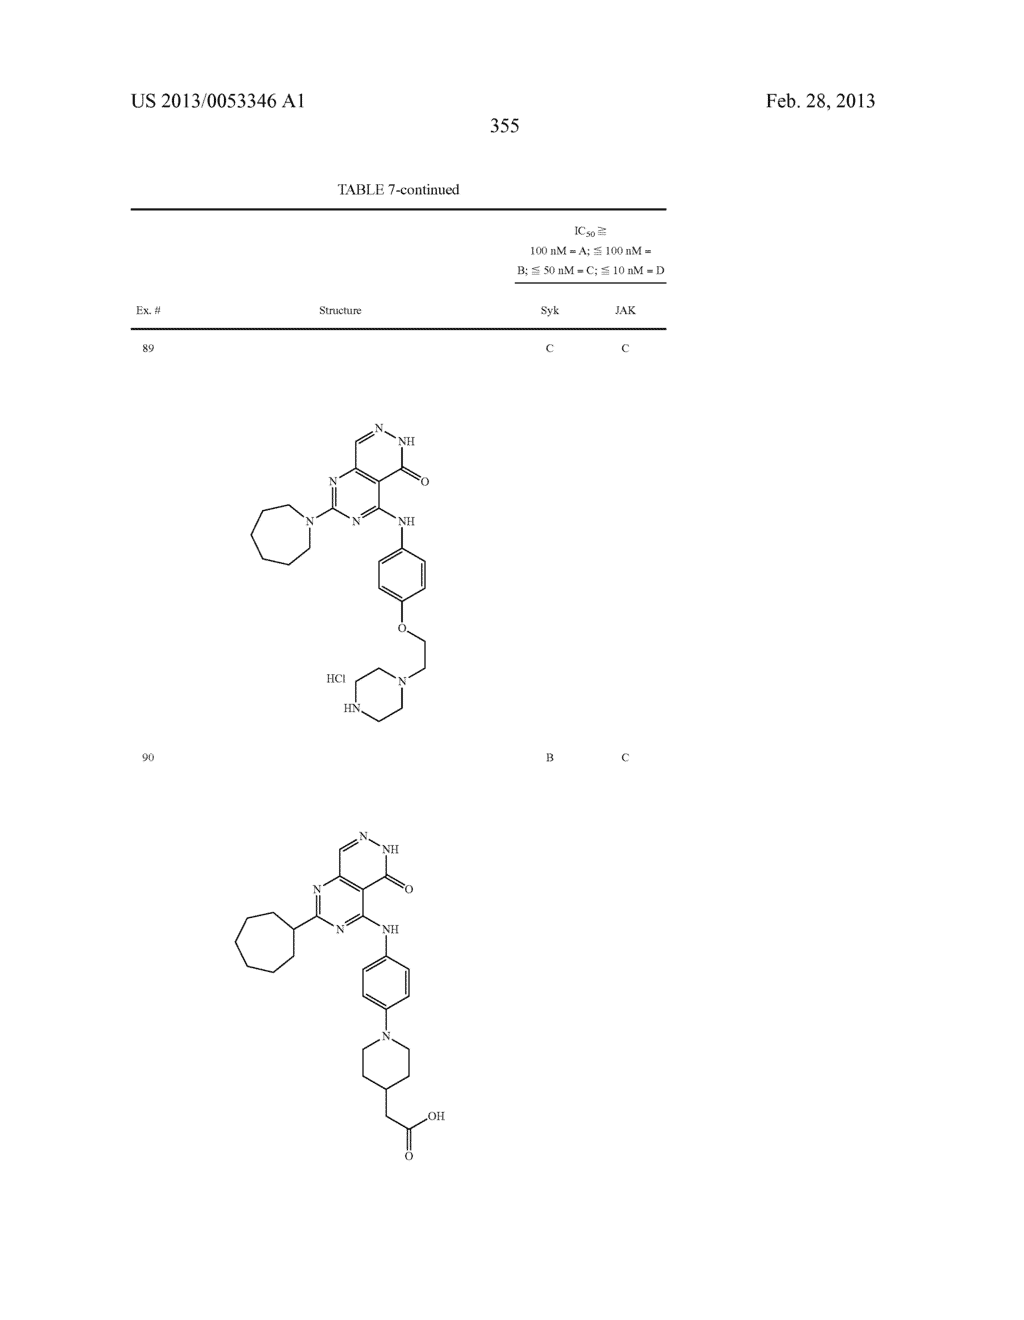 PYRIMIDO-PYRIDAZINONE COMPOUNDS AND METHODS OF USE THEREOF - diagram, schematic, and image 359